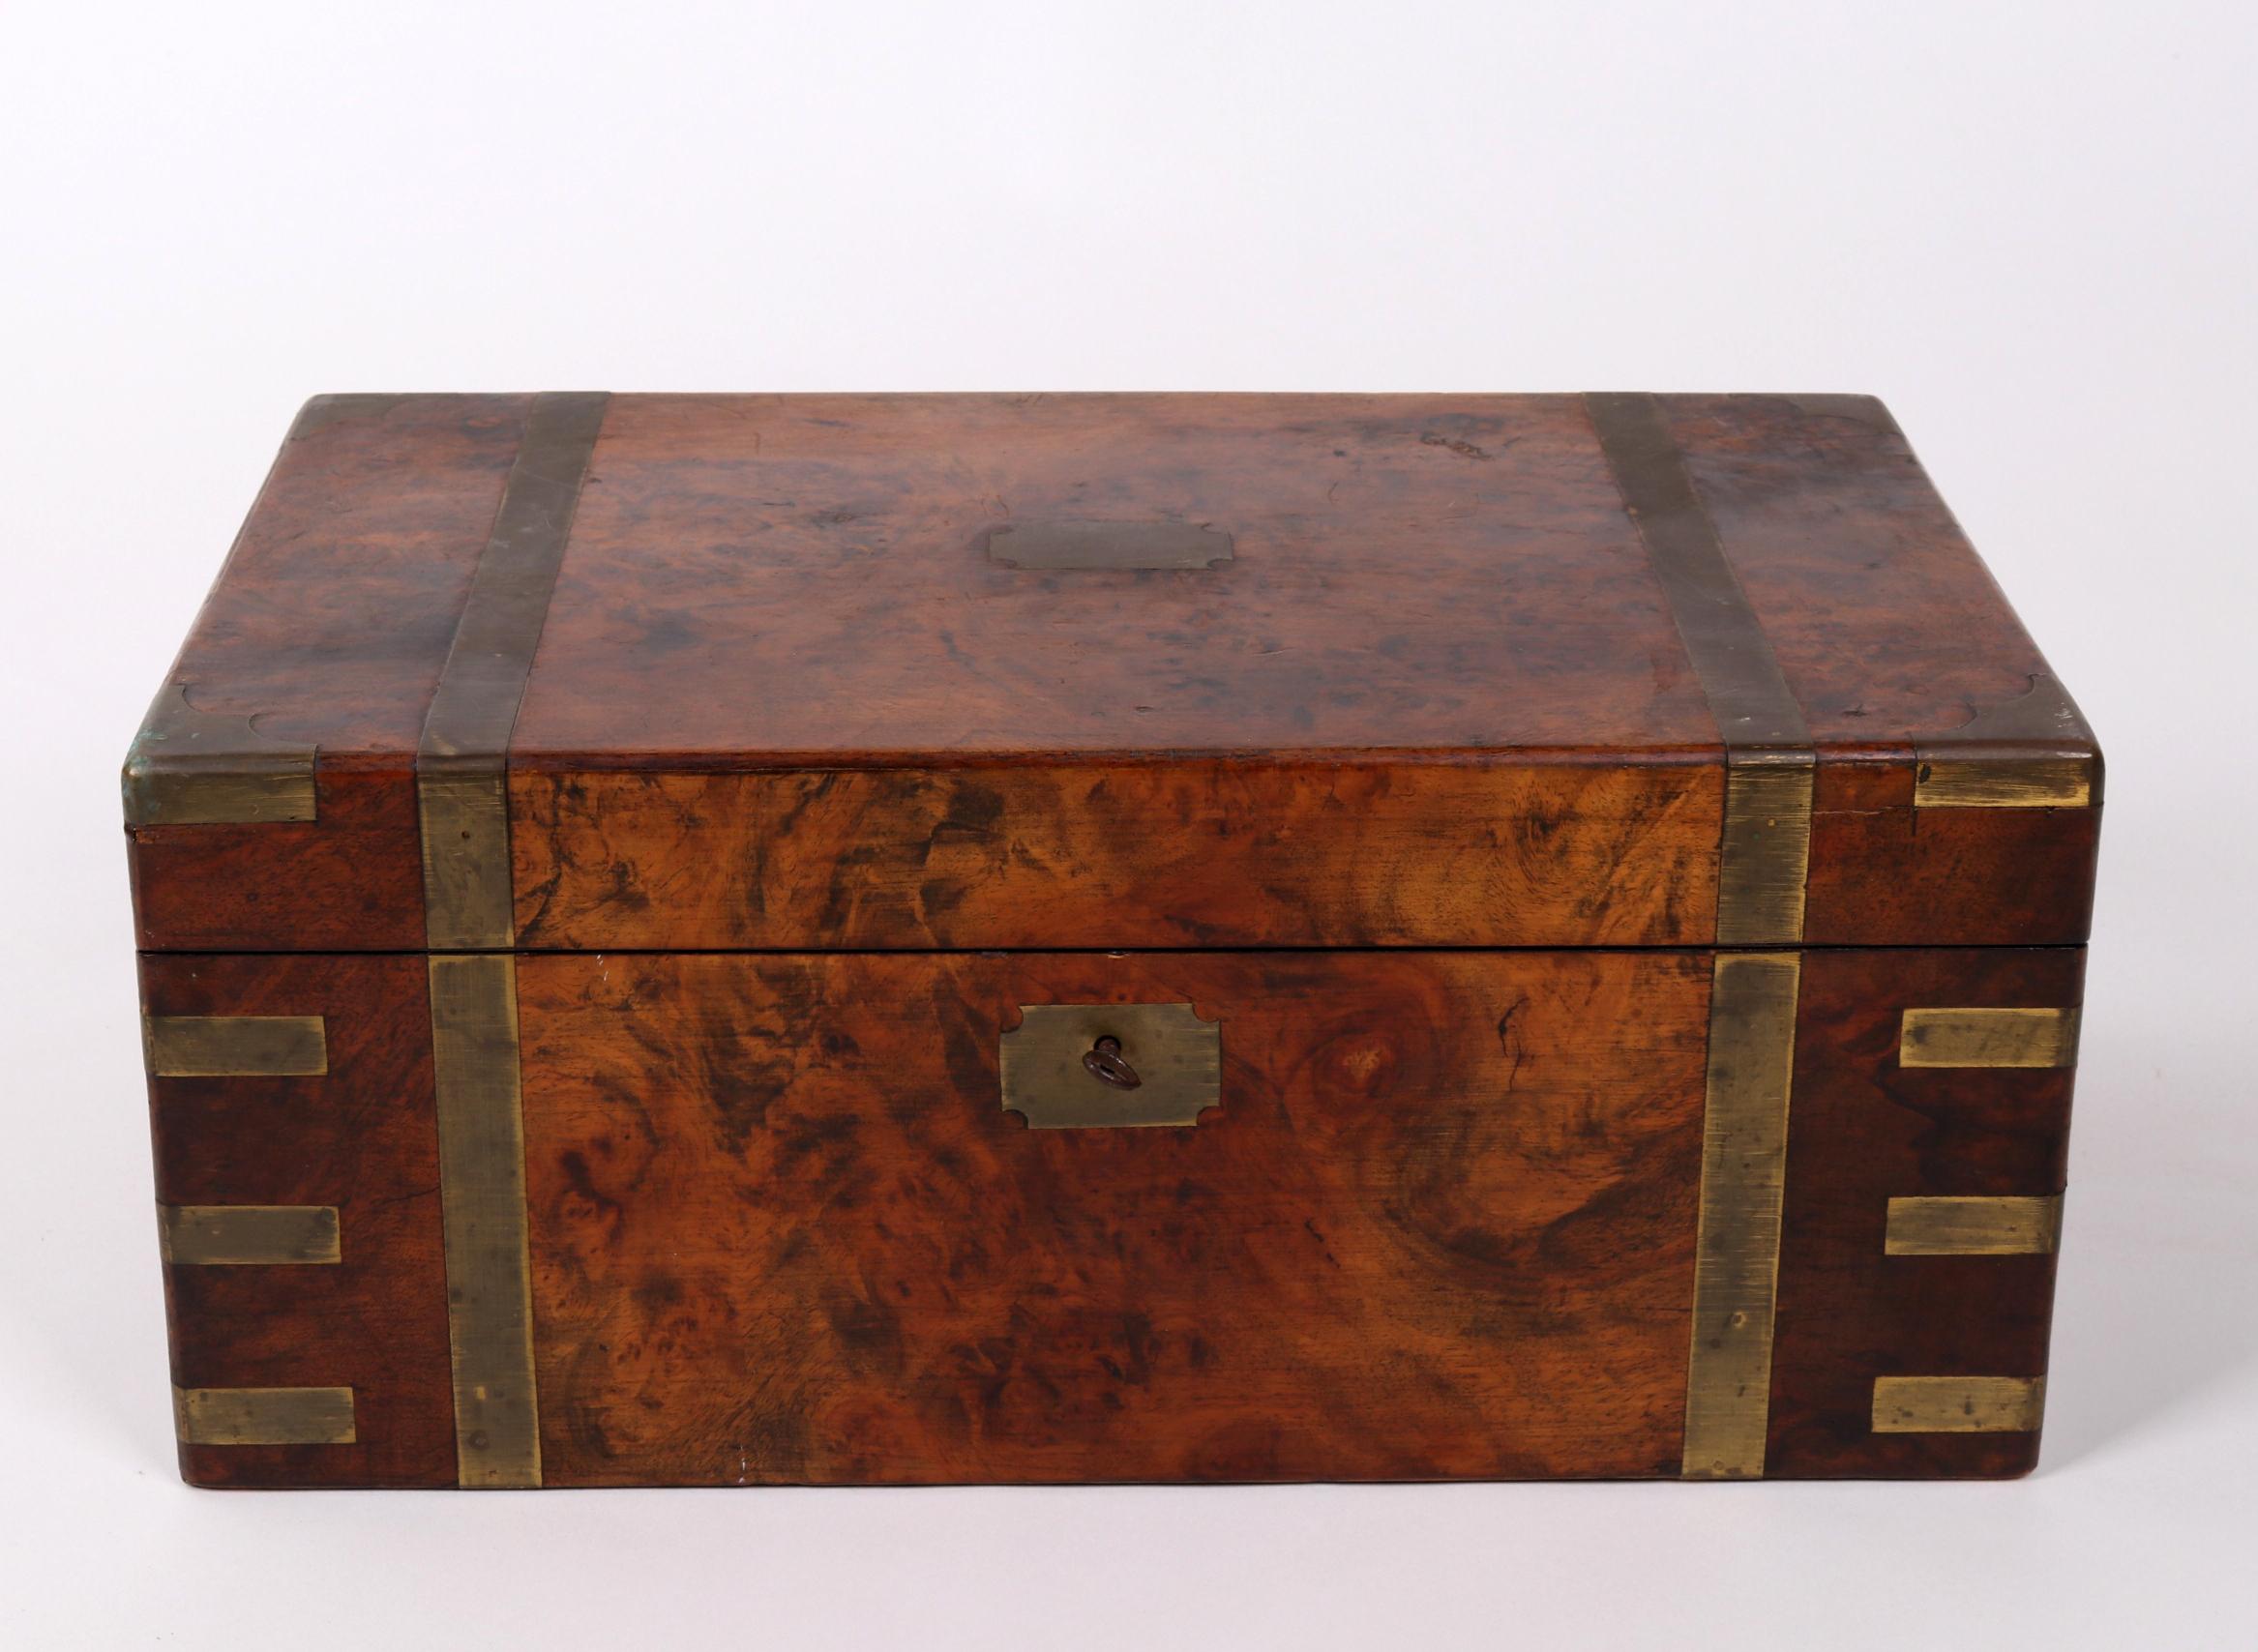 19th century English rootwood office box with brass fittings and leather interior.